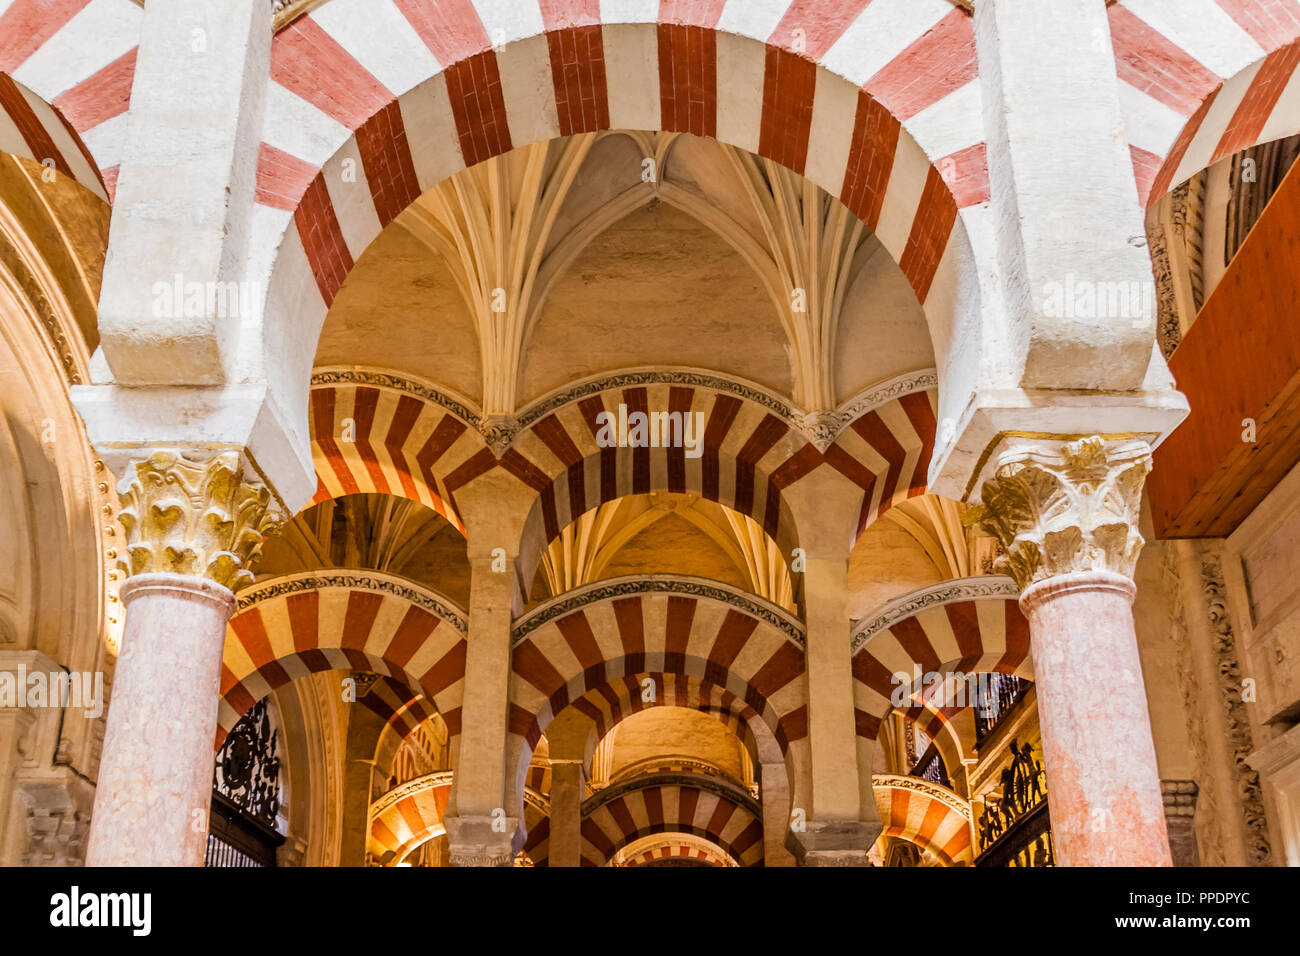 Pillars and arches in the Mezquita Cathedral, also known as the Great Mosque of Cordoba, Cordoba, Spain. Stock Photo